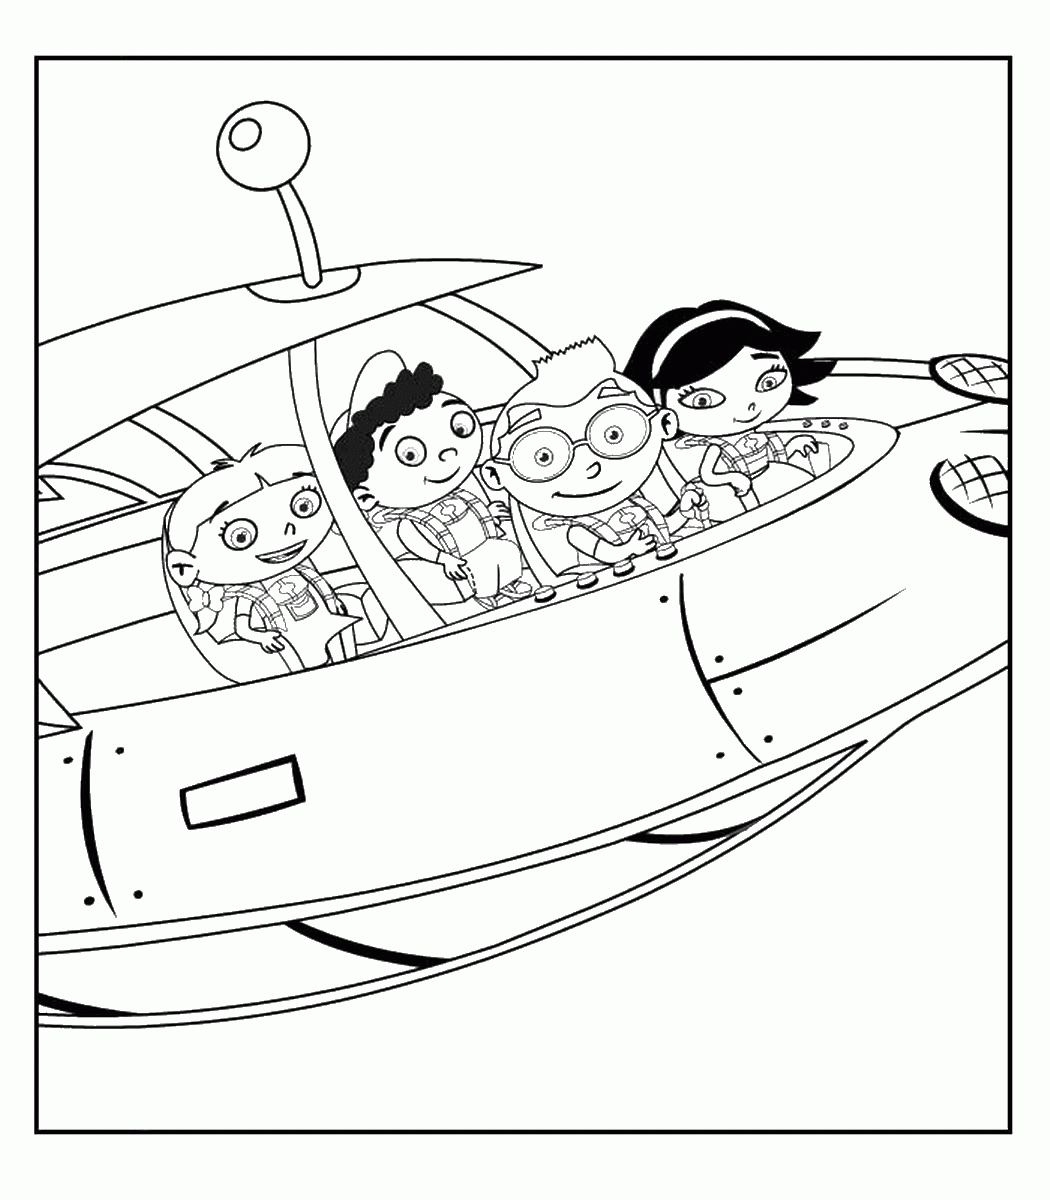 Little Einsteins Coloring Pages TV Film little_einsteins_33 Printable 2020 04497 Coloring4free